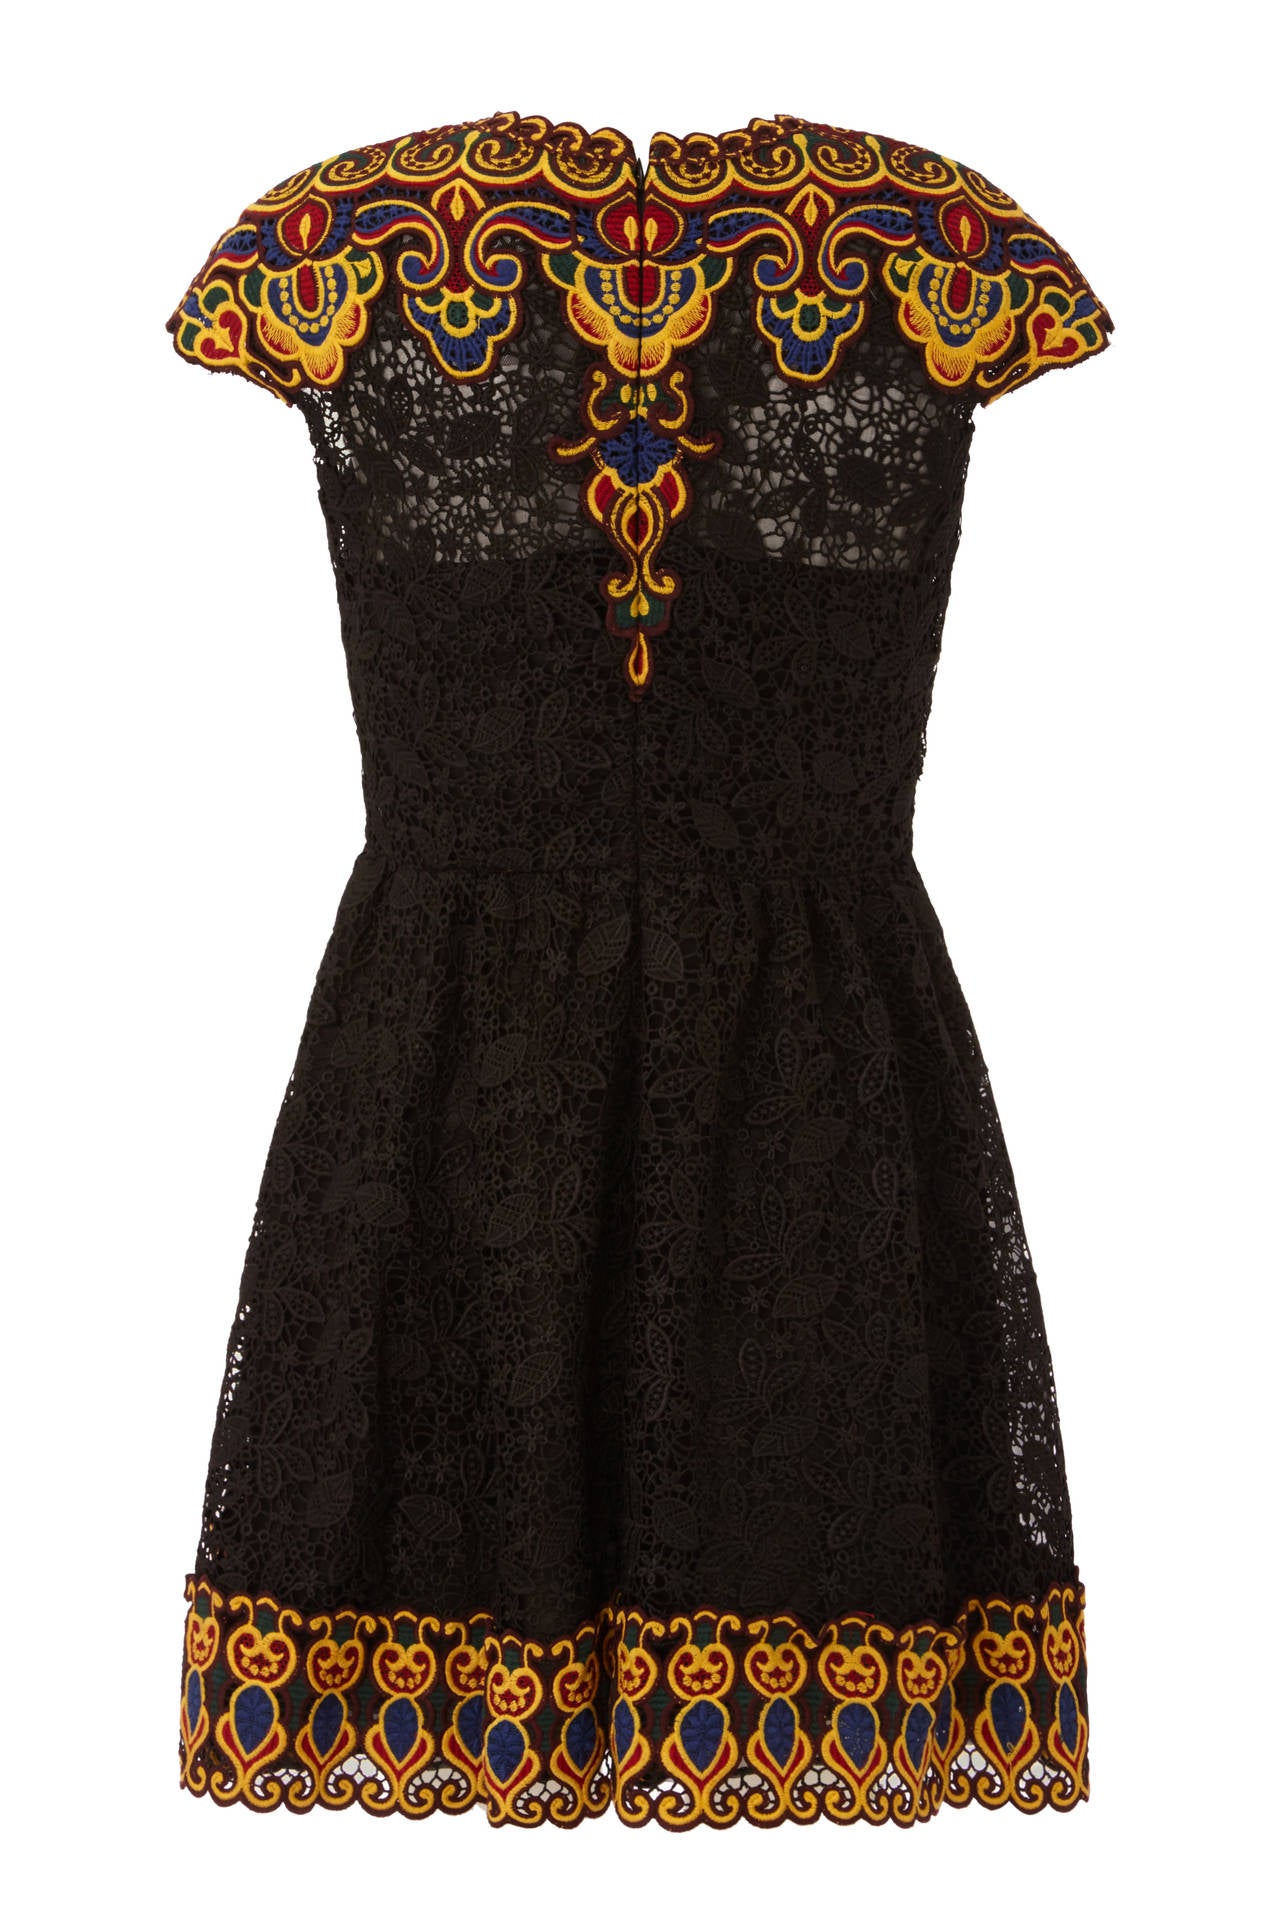 Beautiful Valentino dress from the 2014 spring/summer collection, look 46.  This was the short sleeved version which made it into commercial production following the runway show some 6-months previous.  In black cotton mix lace with colourful lace